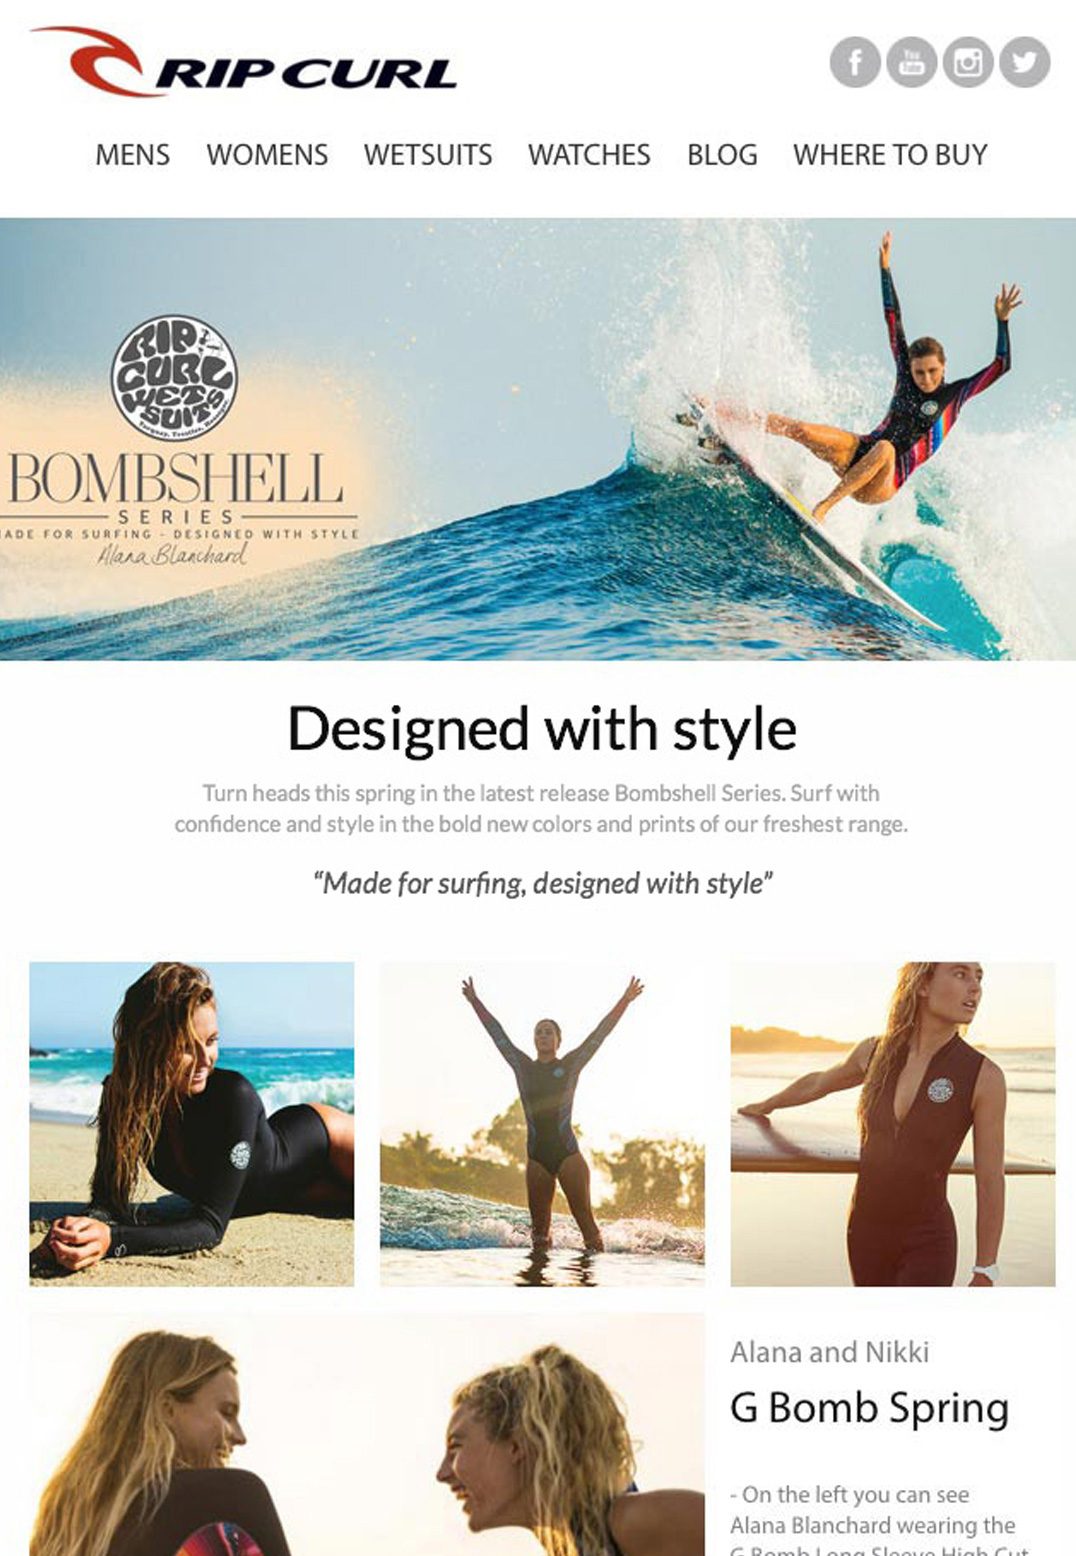 email marketing and automation examples - ripcurl email example